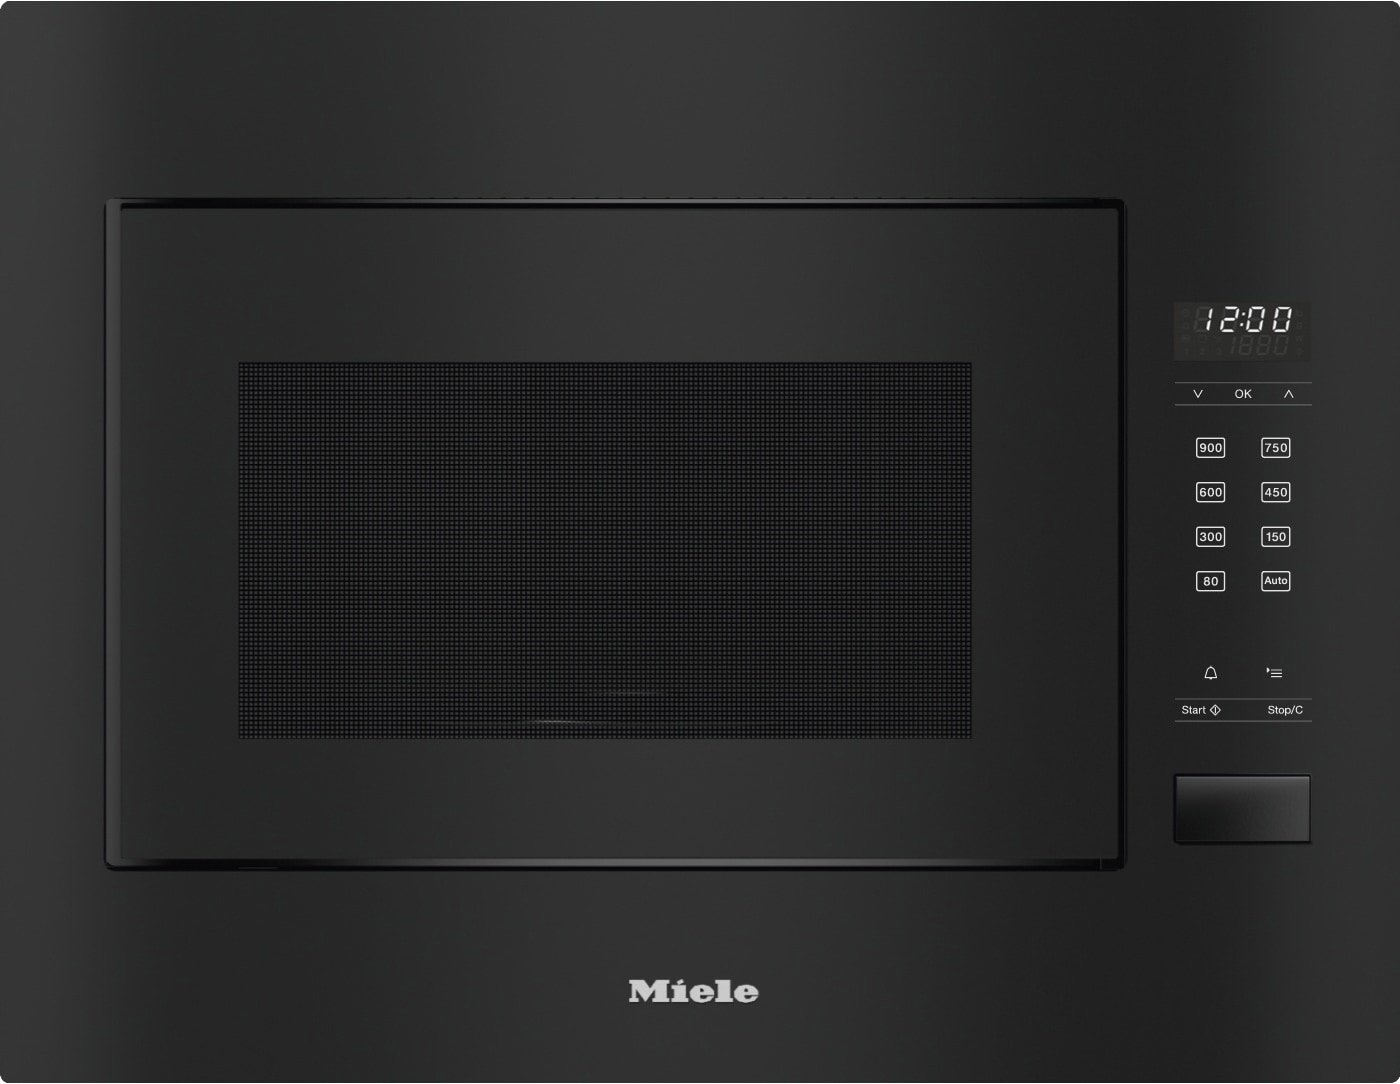 10: Miele mikroovn  M2240OBSW integreret